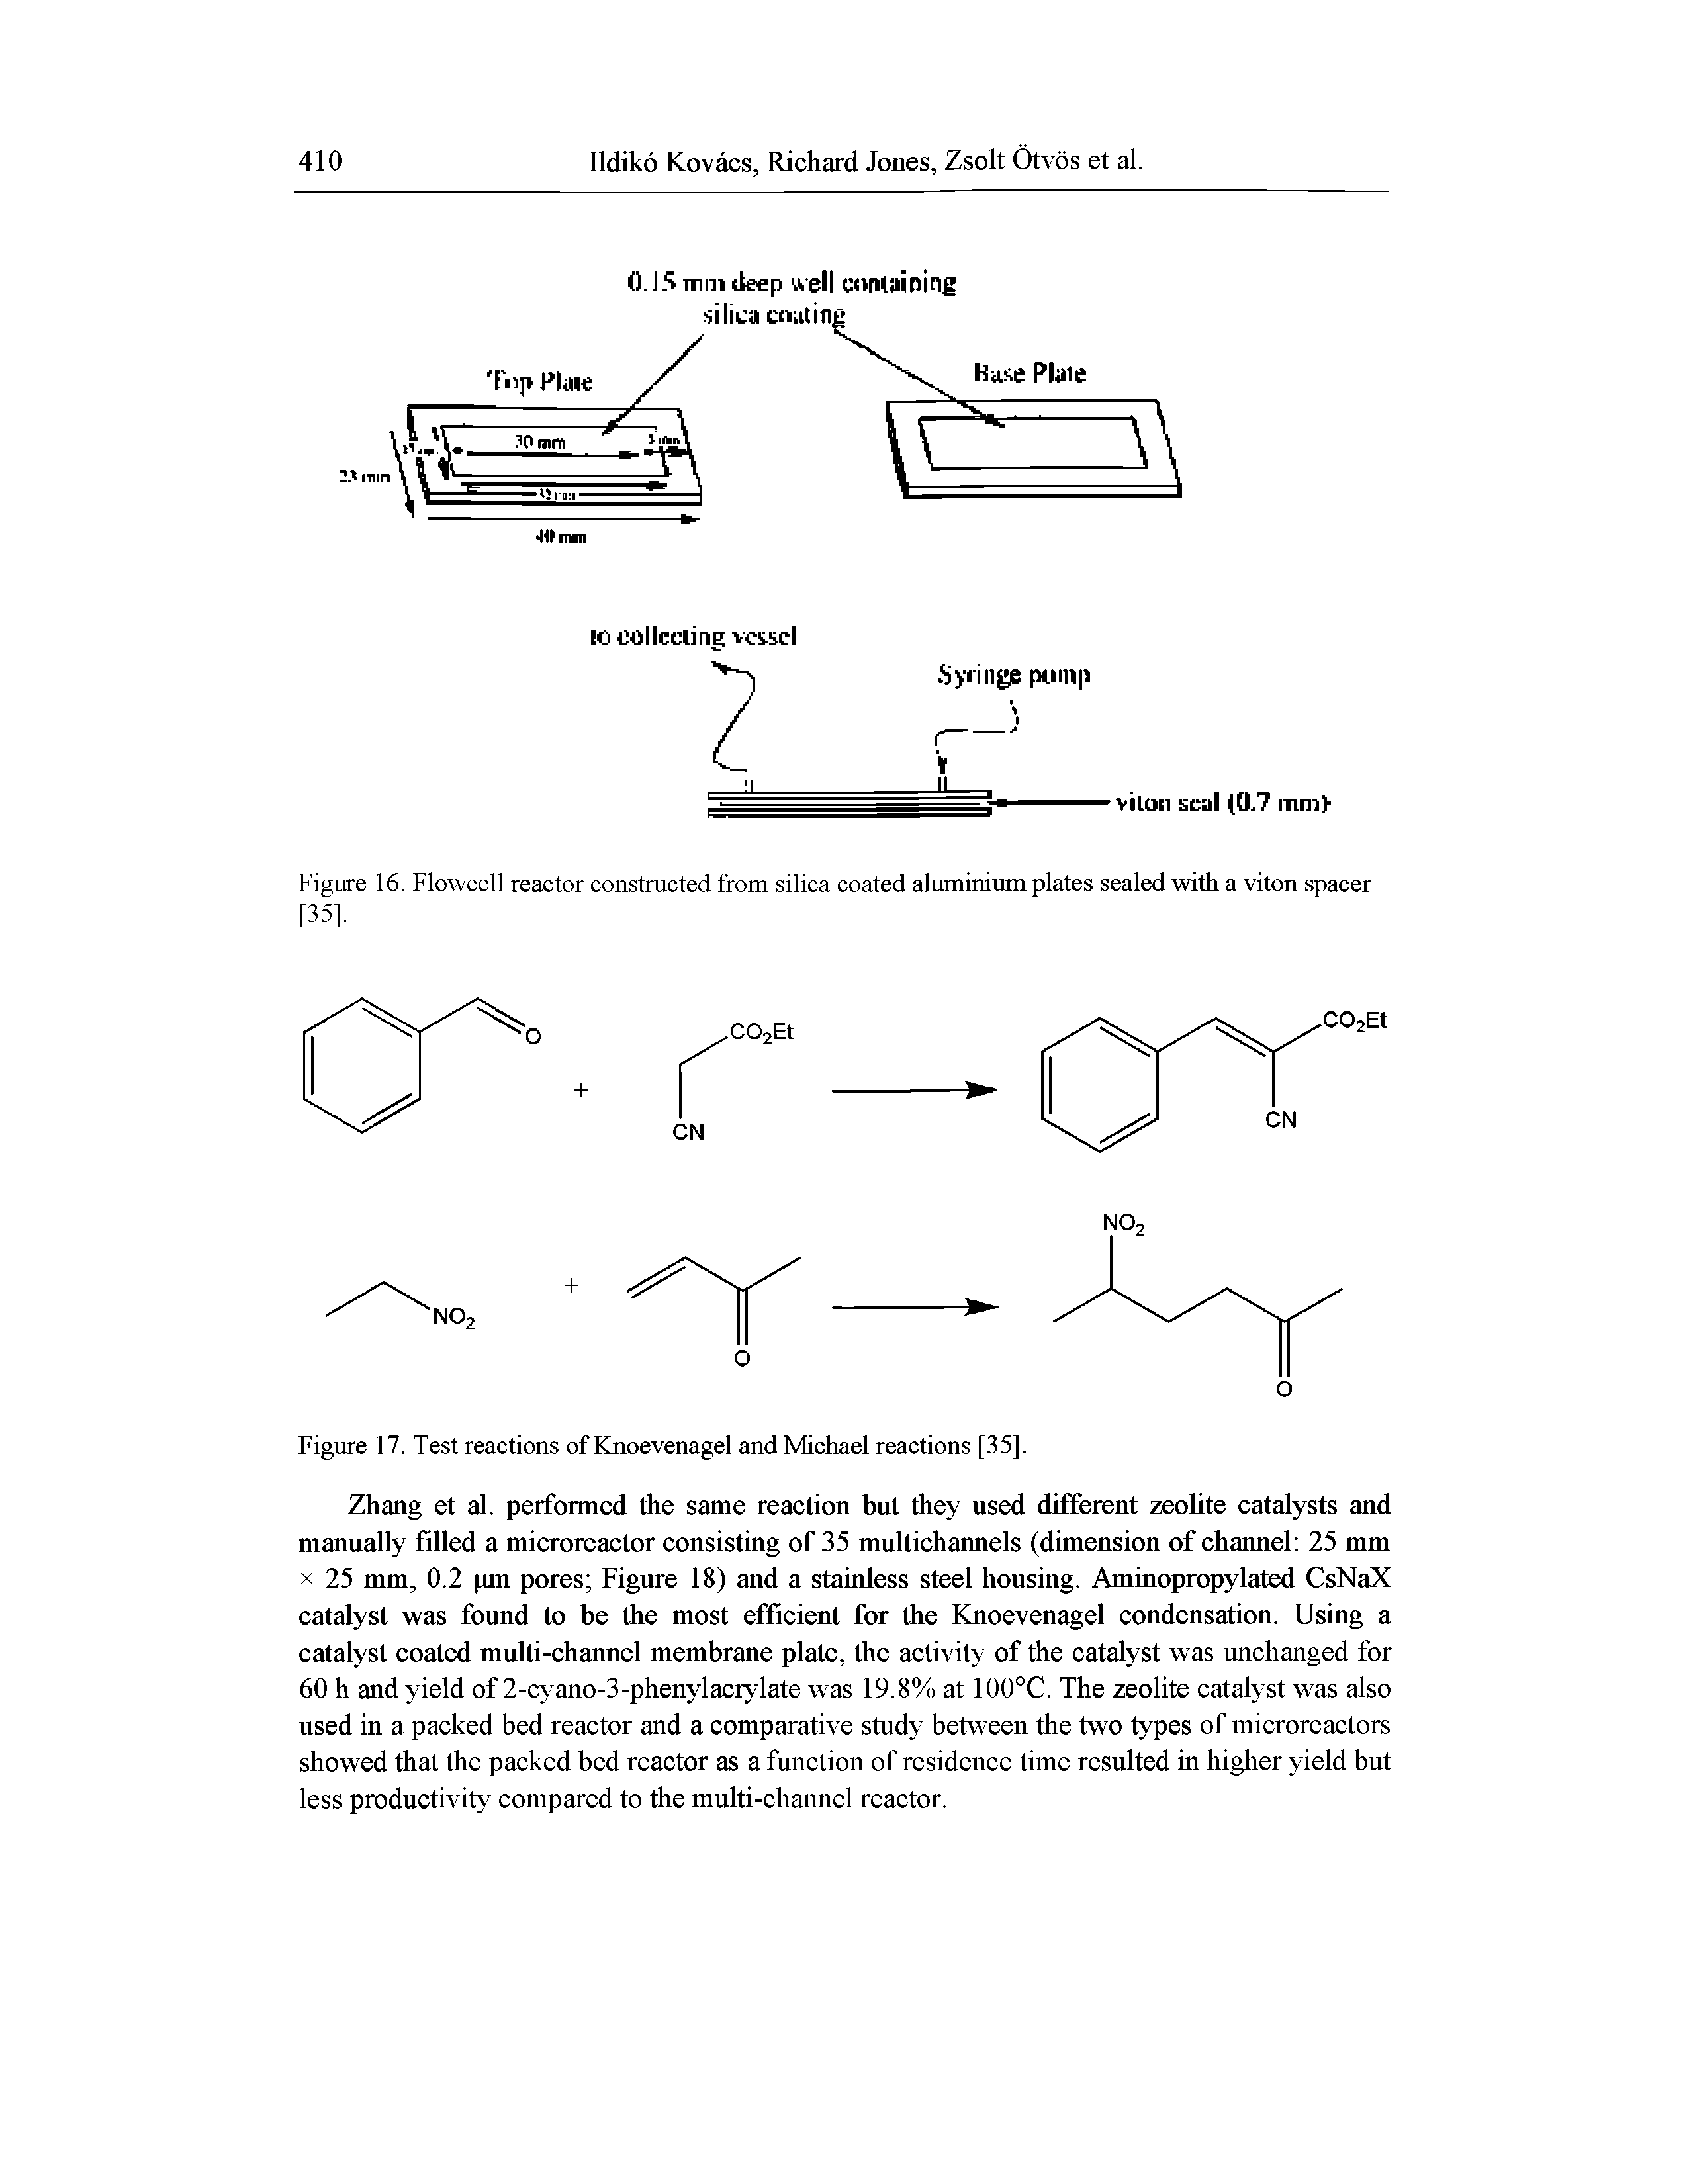 Figure 17. Test reactions of Knoevenagel and Michael reactions [35].